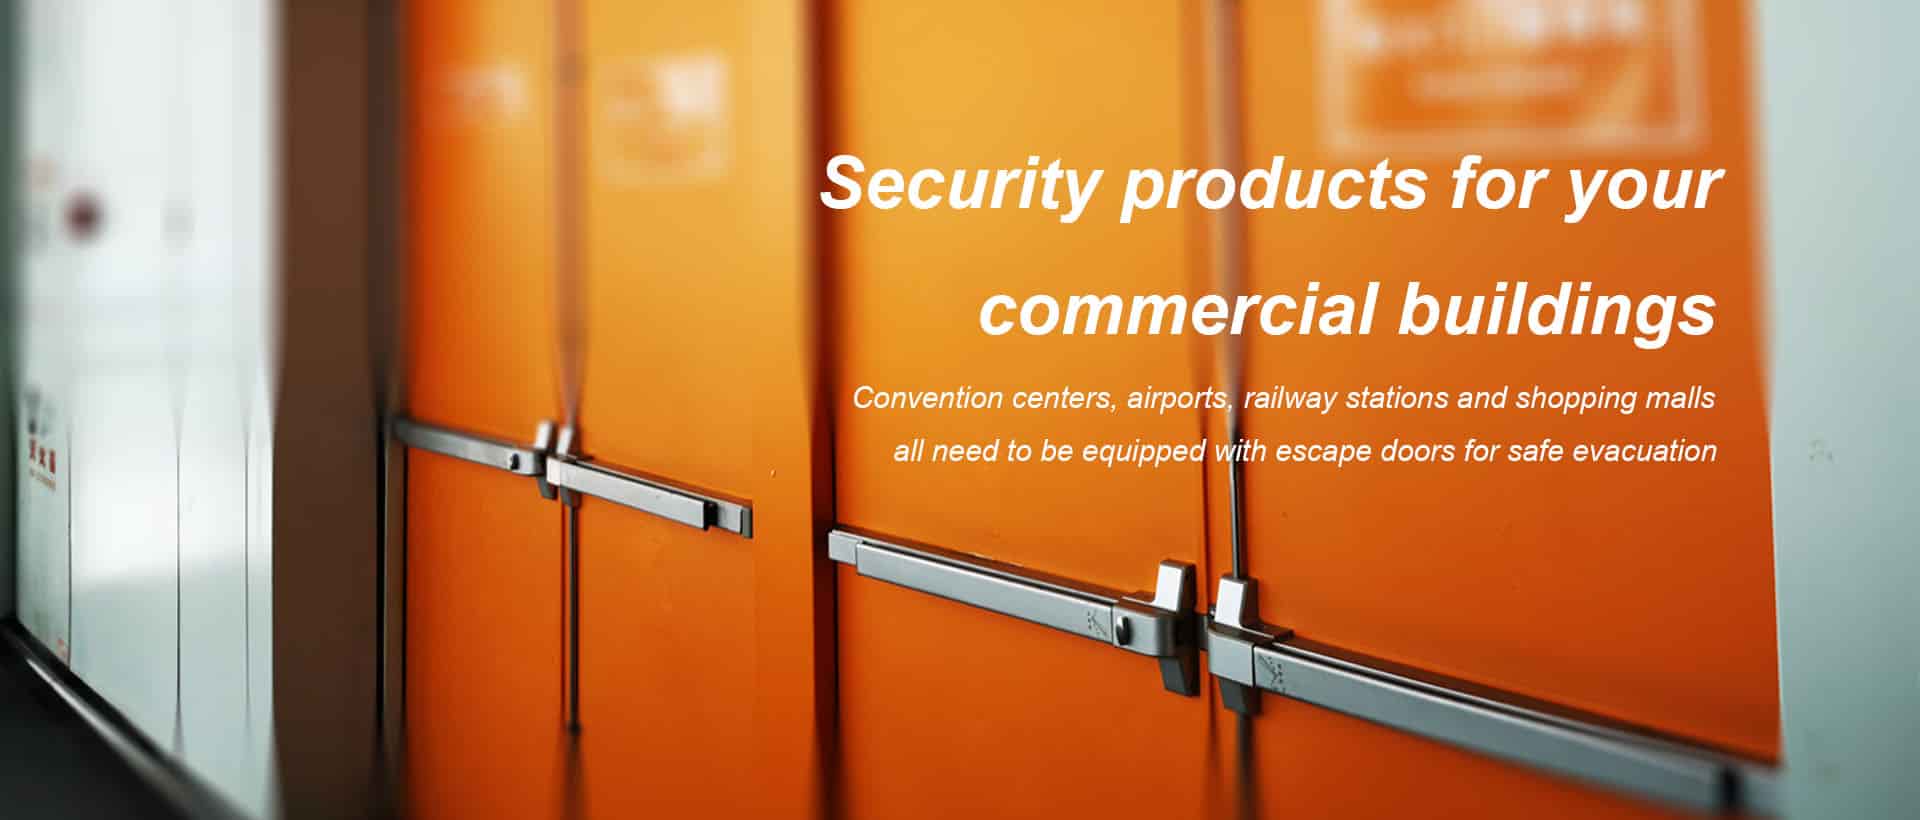 Security products for your commercial buildings